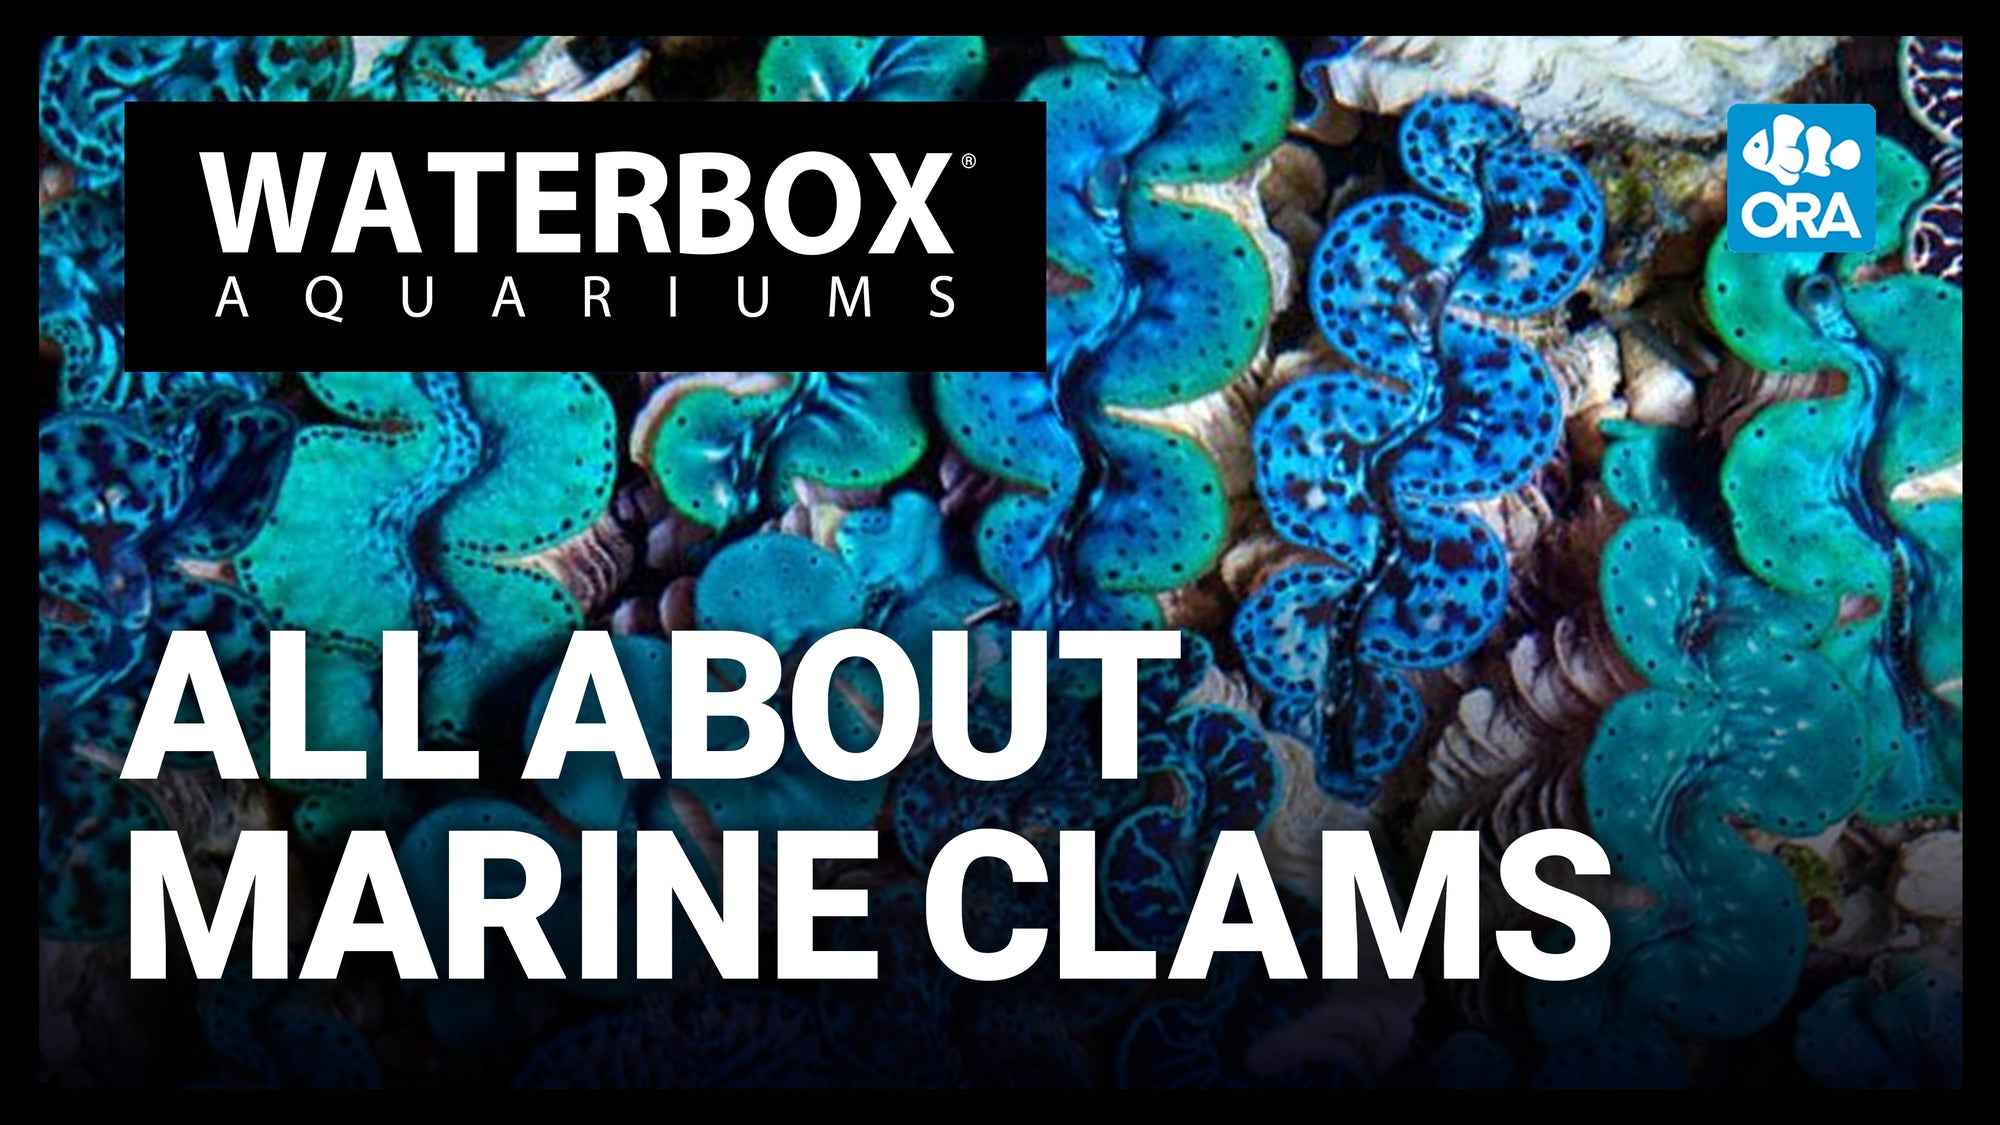 The Do's and Don'ts of Clam Care | ORA® Aquacultured Clams Have Arrived!